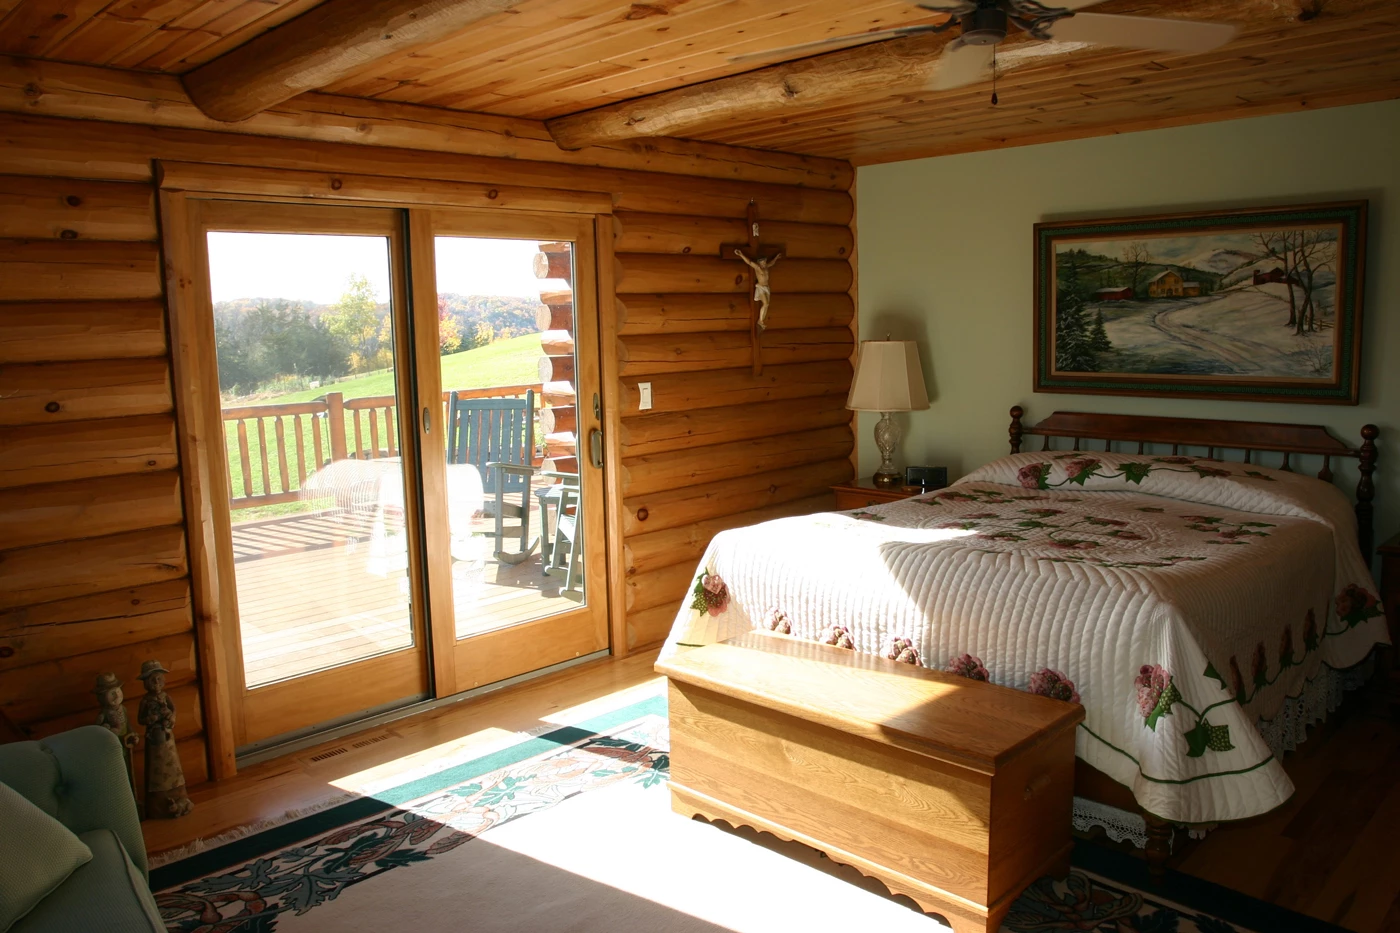 The interior of a luxurious log cabin